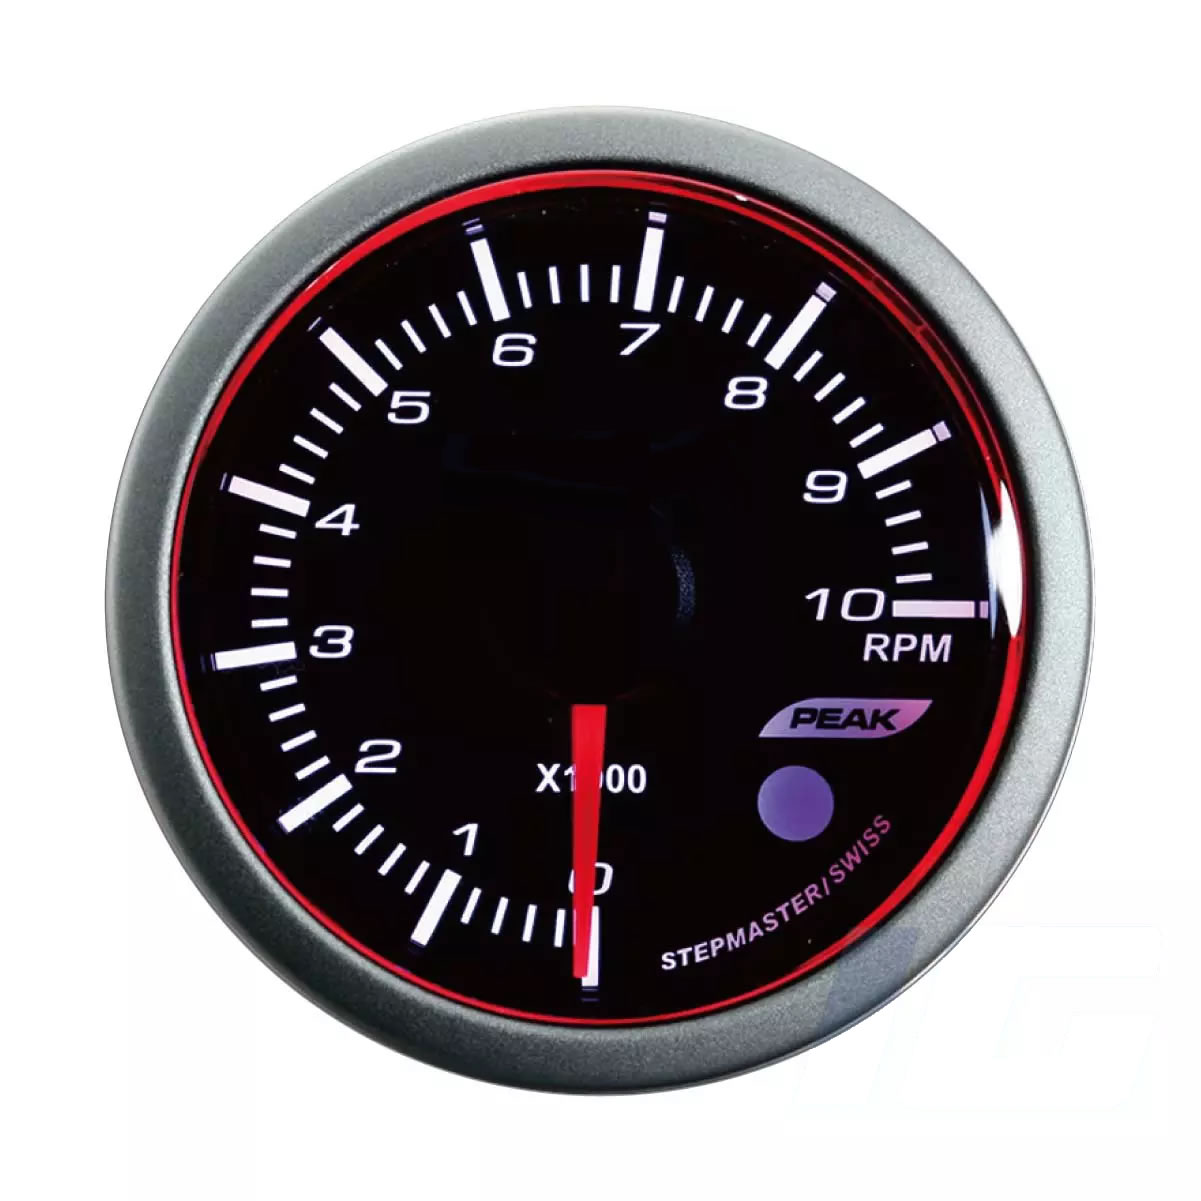 52mm White and Blue and Amber LED Performance Car Gauges - Tachometer With Warning and Peak For Your Sport Racing Car